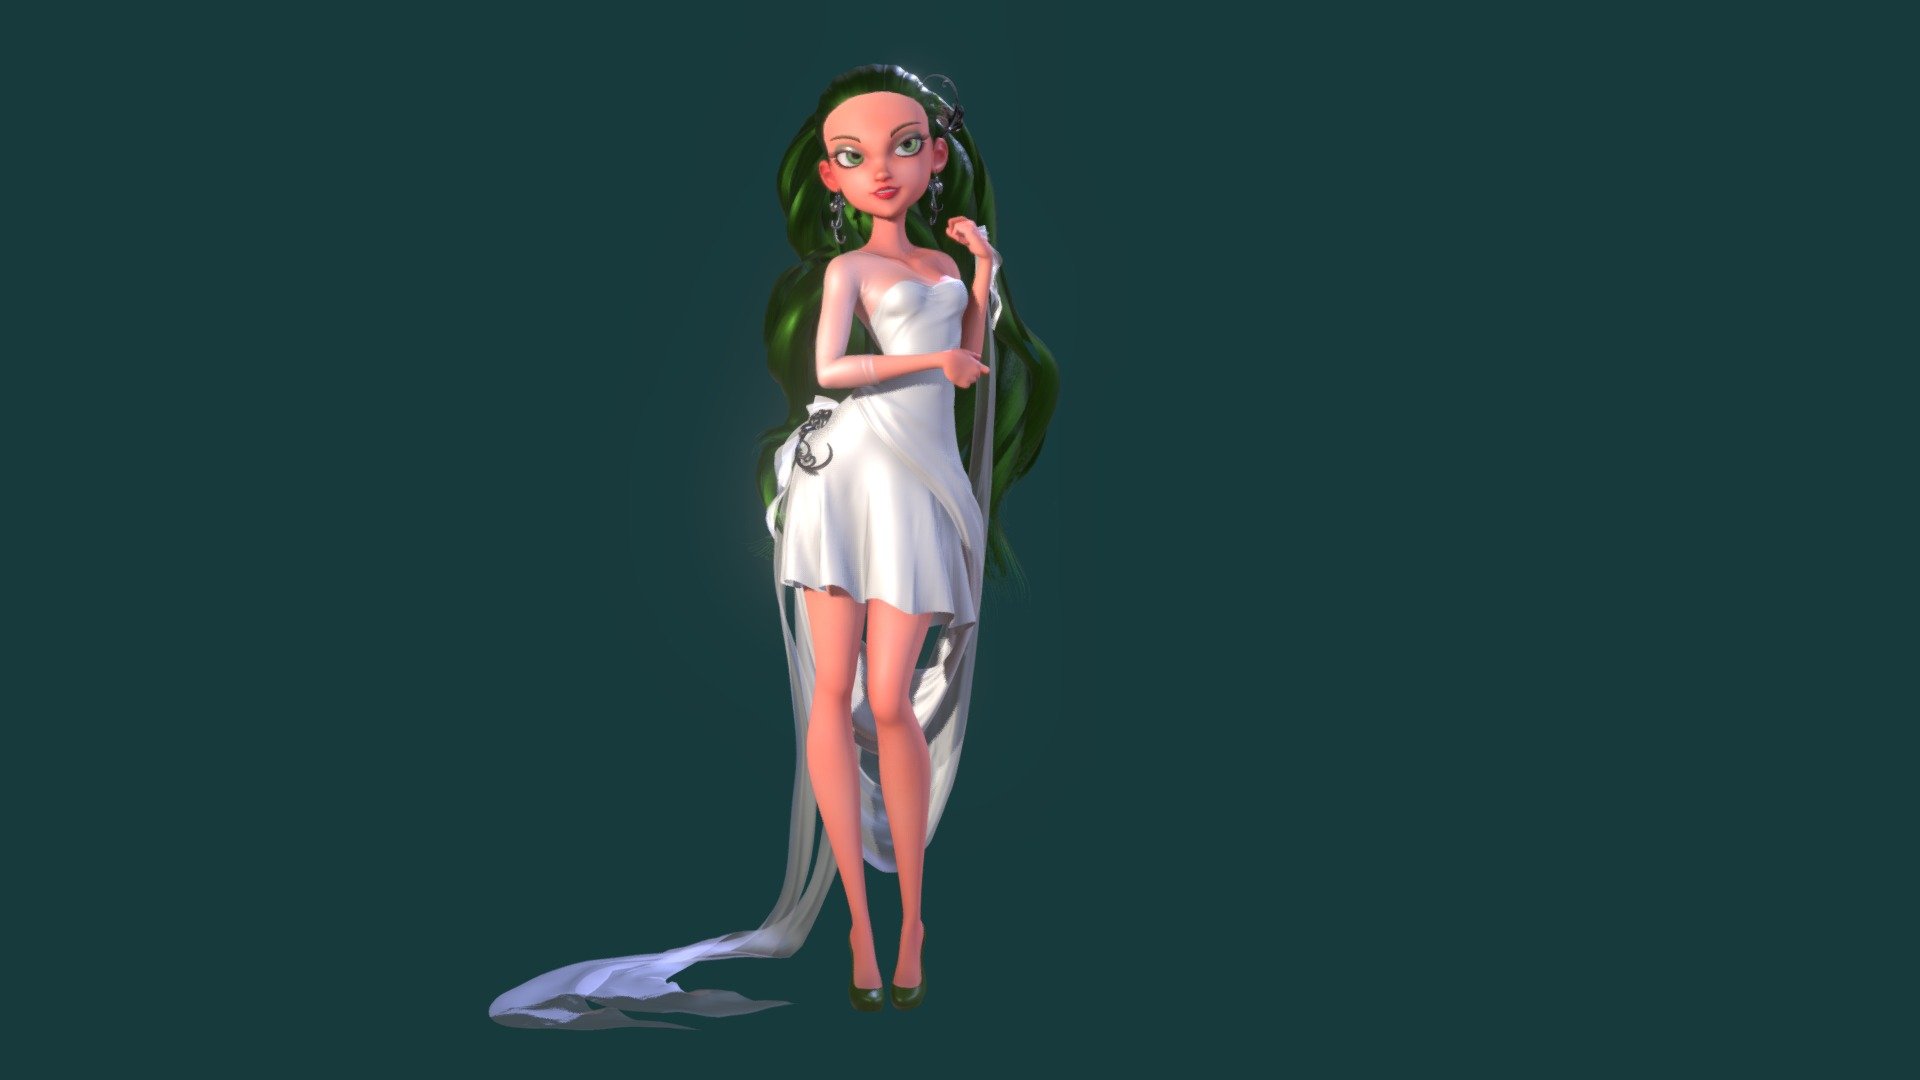 Work based in a personal 2D sketch 3d model